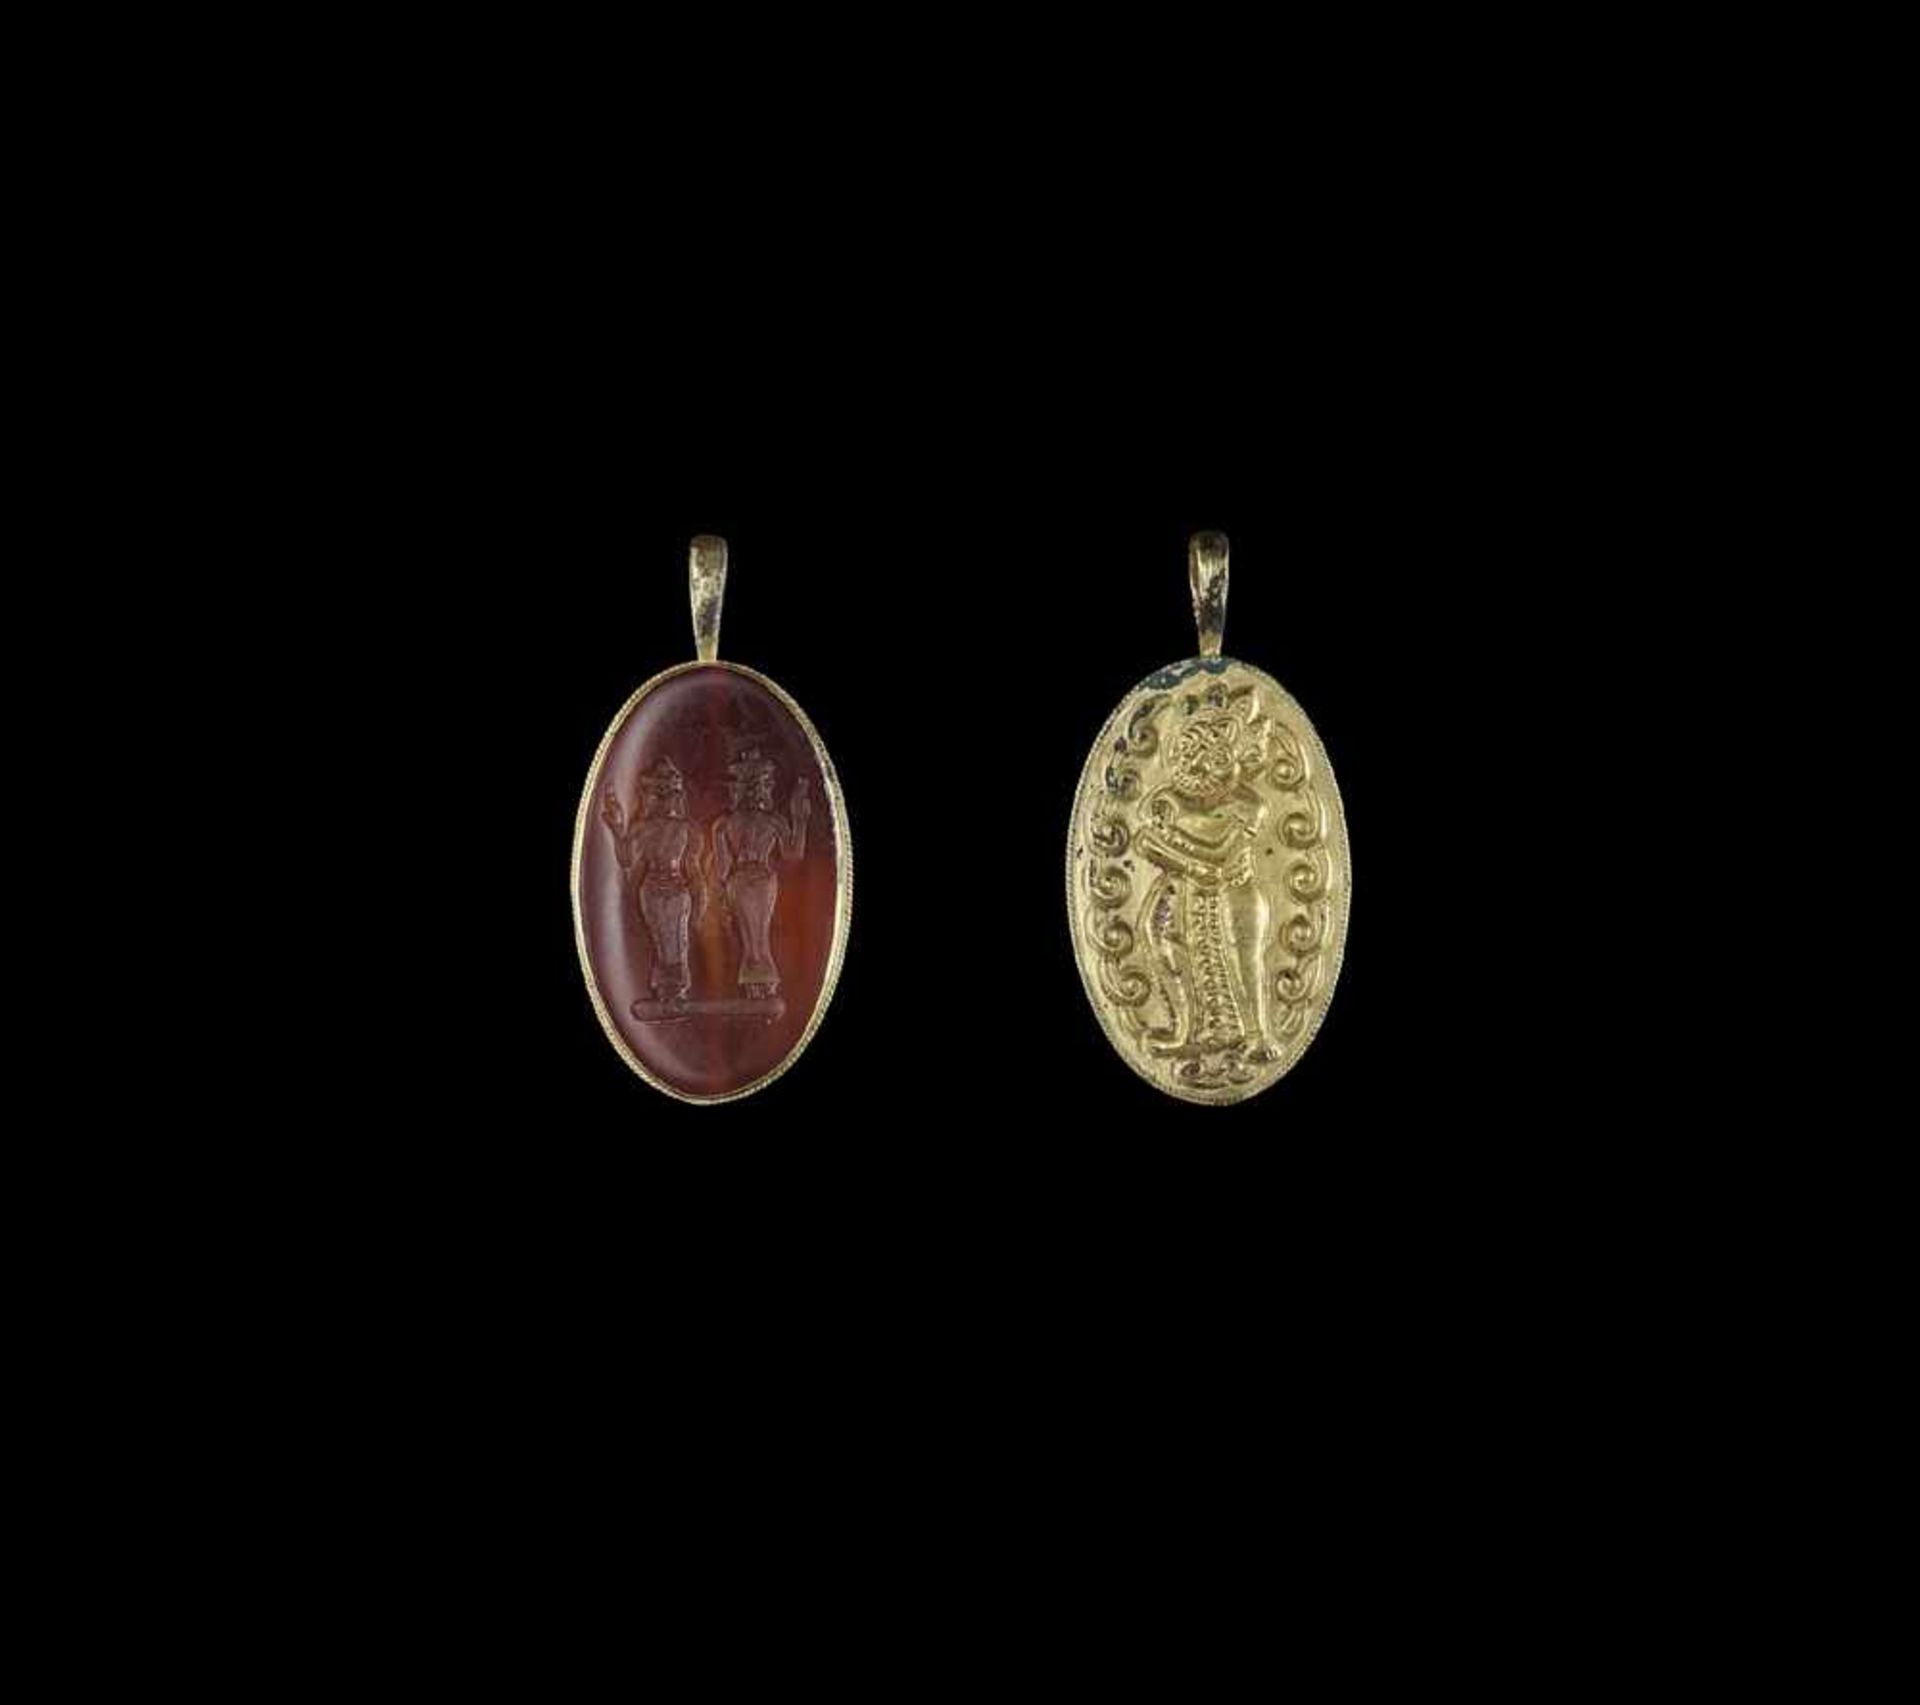 A CHAM REPOUSSÉ GOLD PENDANT WITH STONE INTAGLIO DEPICTING TWO HINDU DEITIES Champa, classical